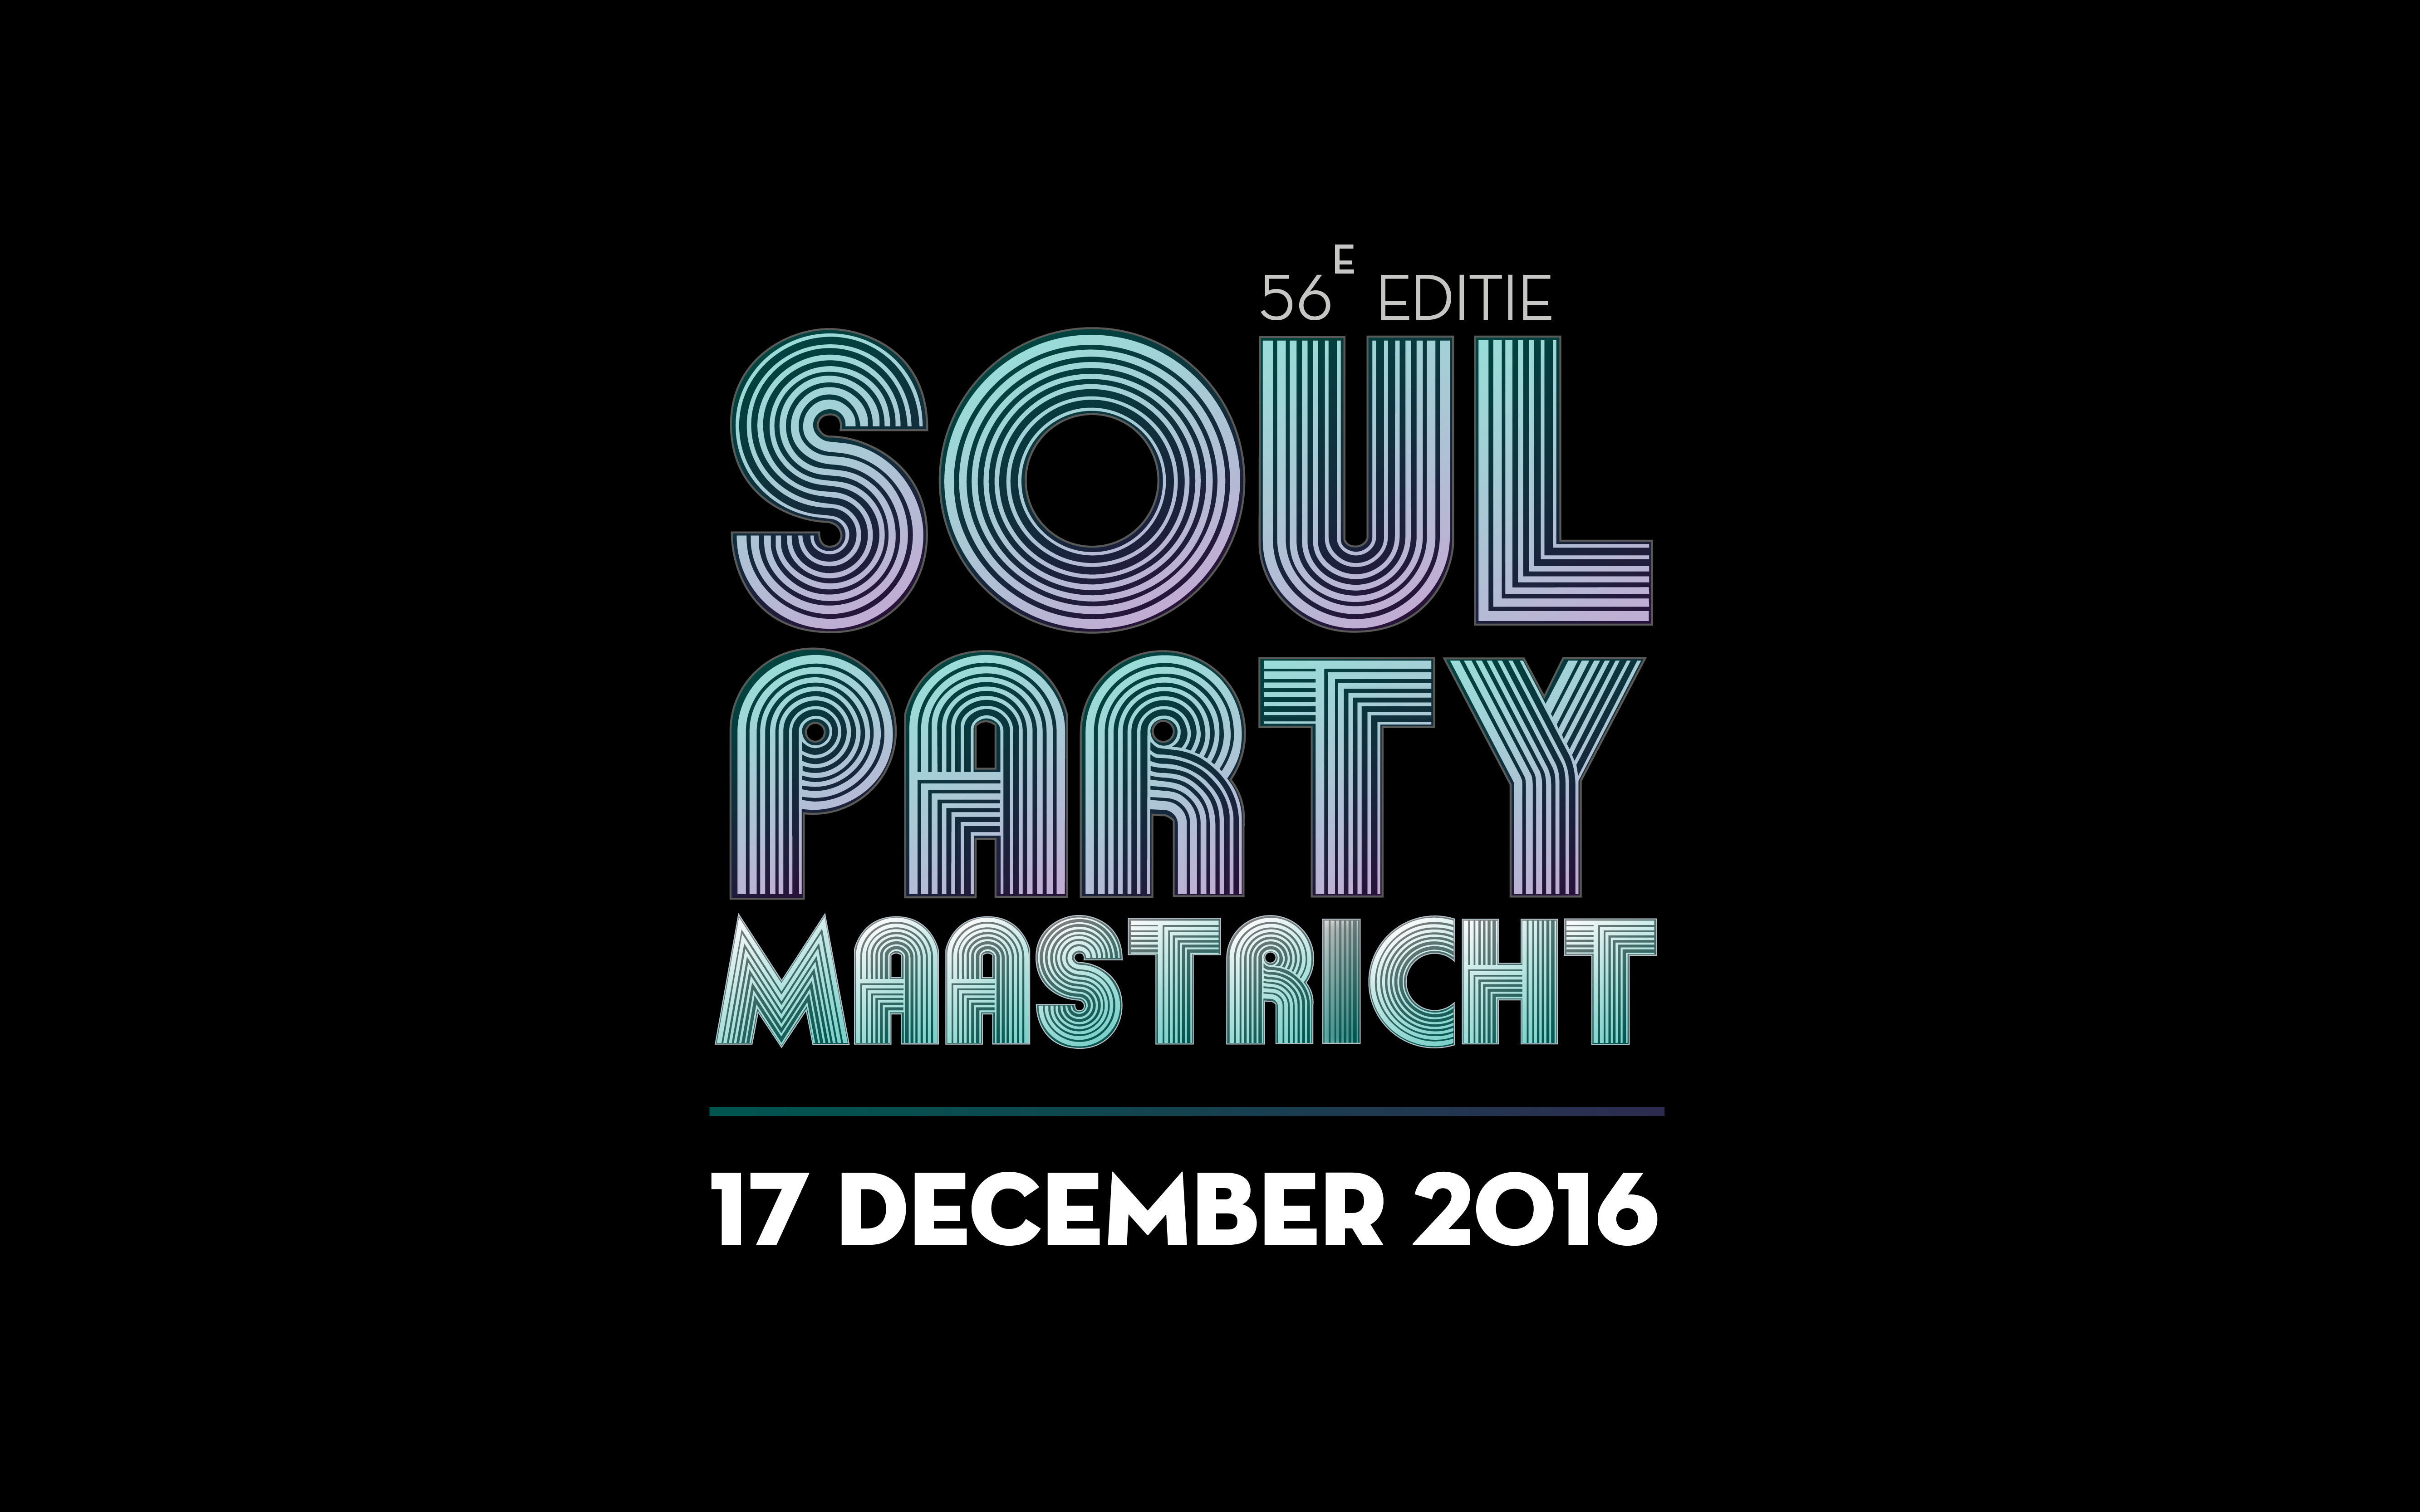 Soulparty 17 december 2016